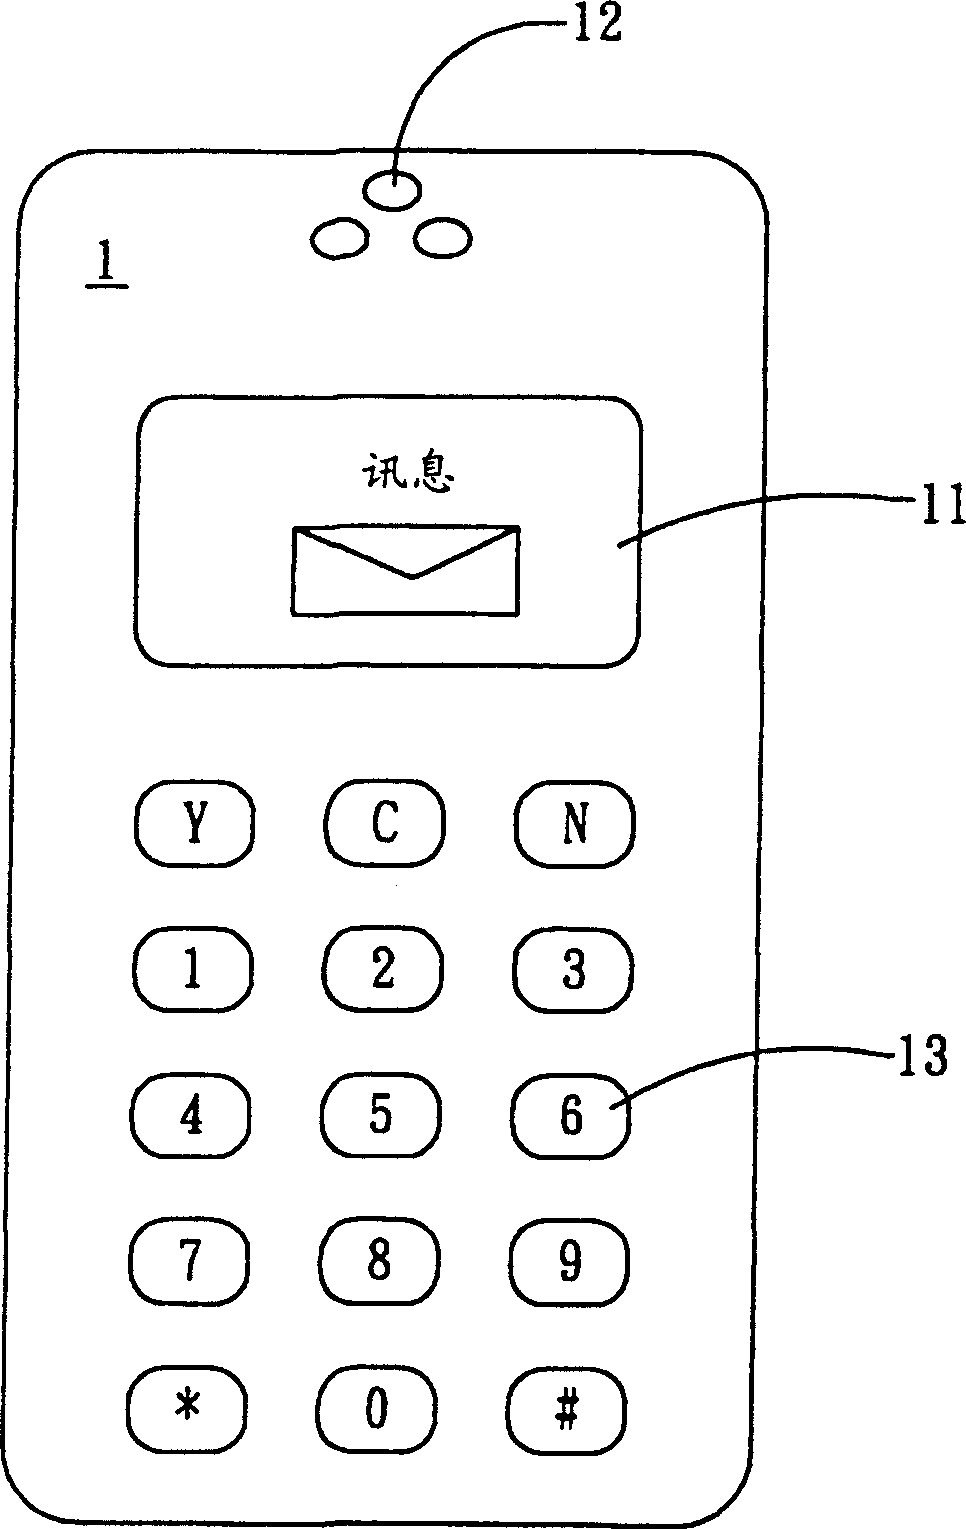 Guide vocie personal mobile communication device and processing method thereof